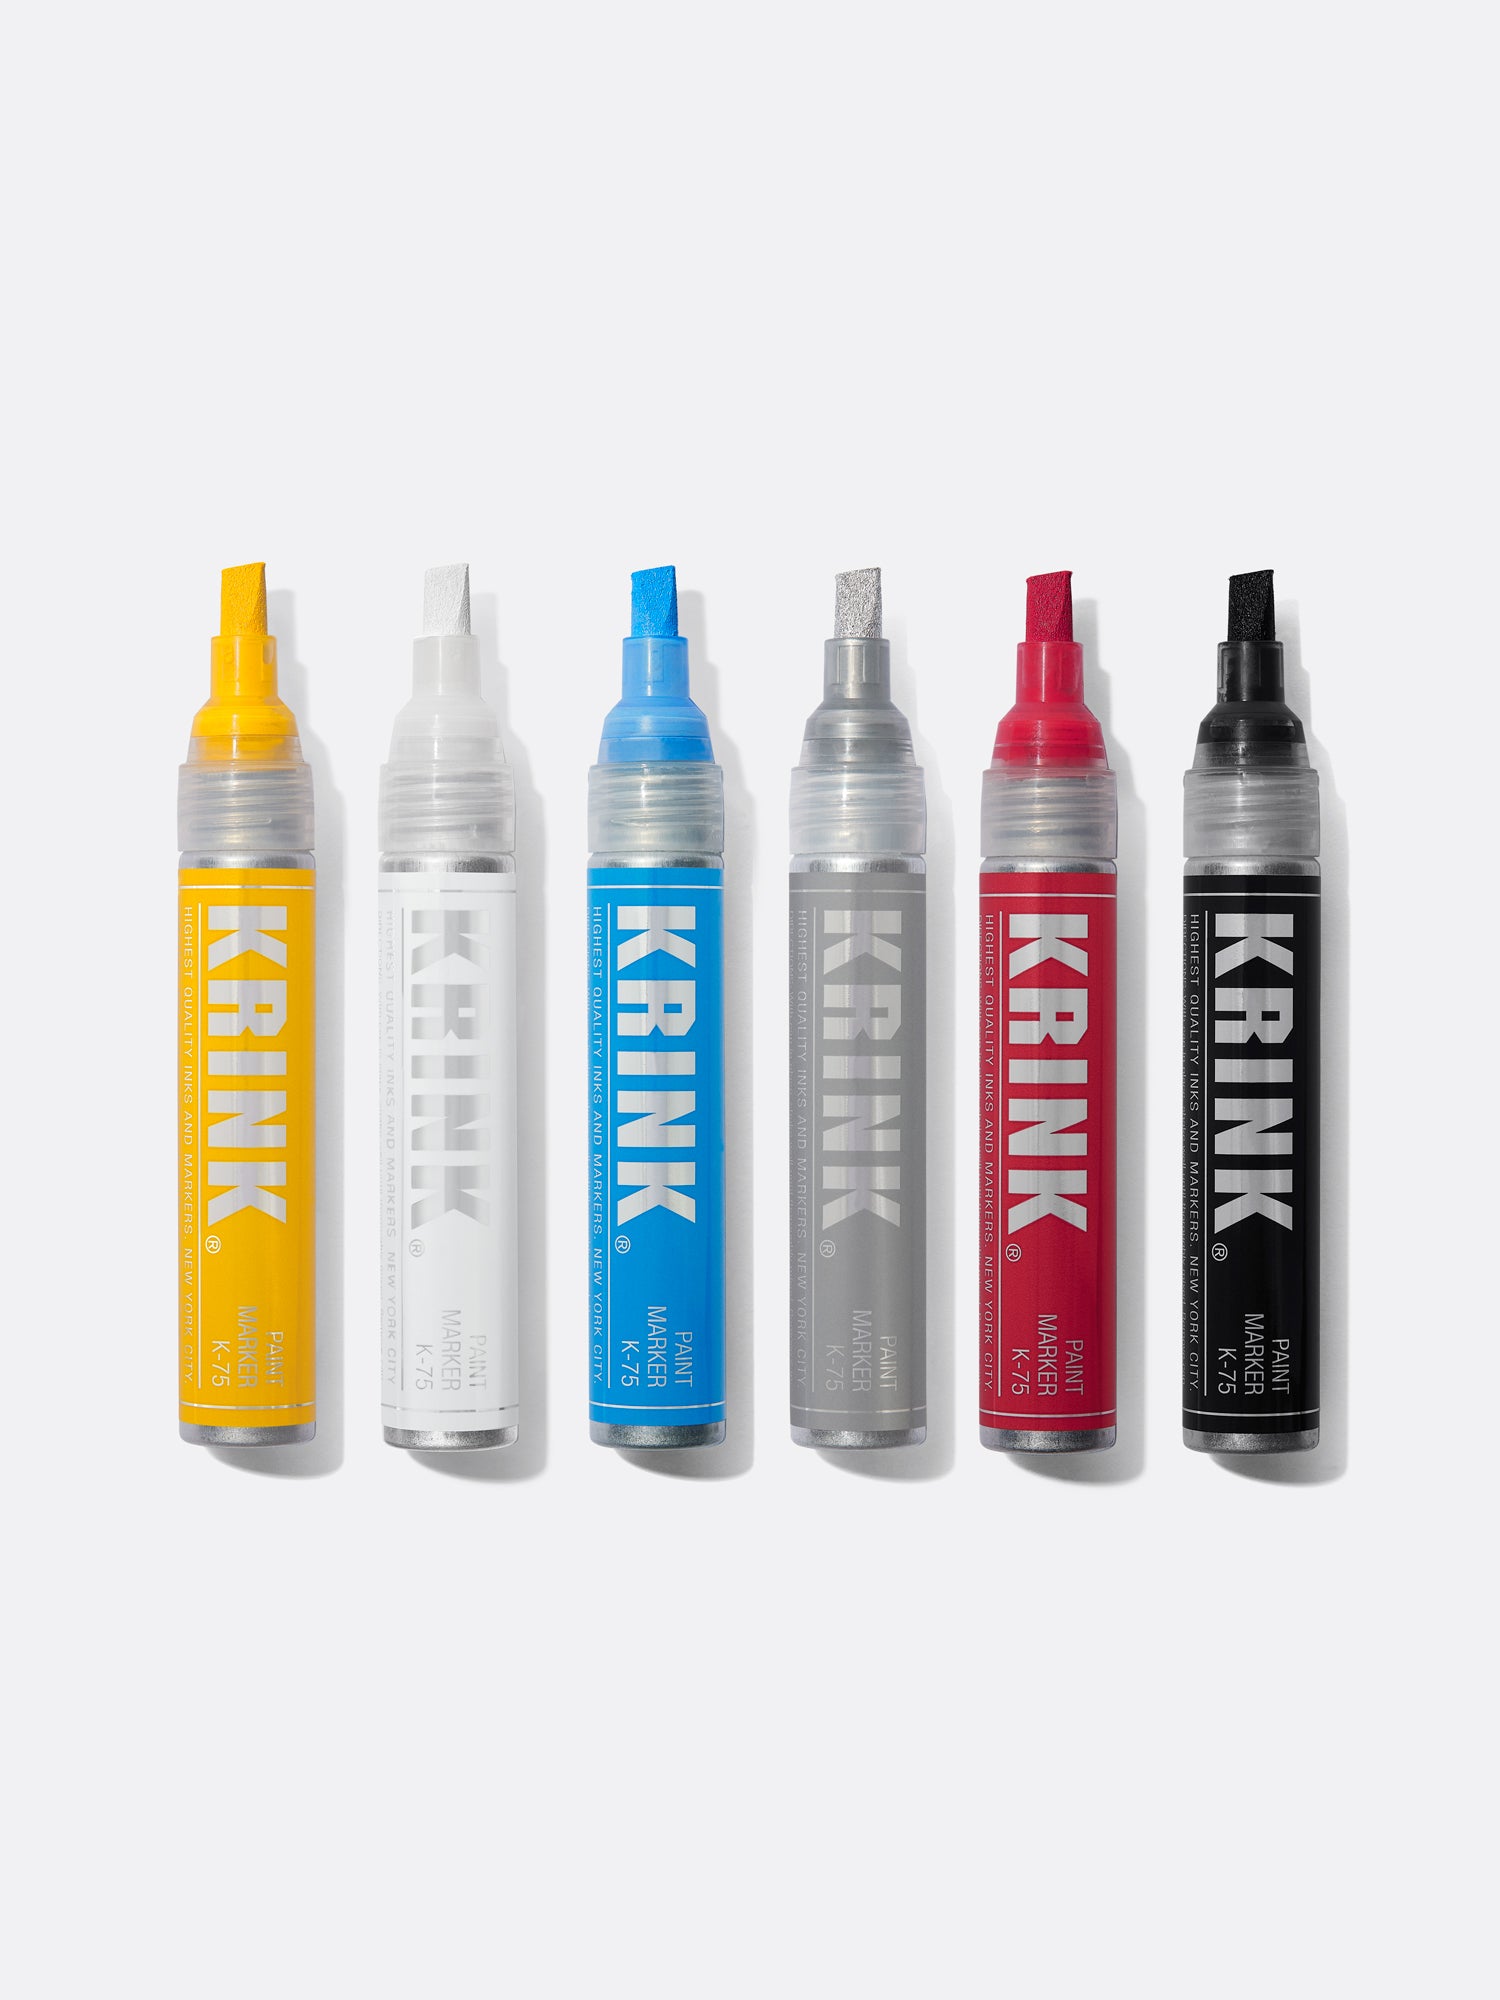 Krink K-75 Paint Markers - Set of 6